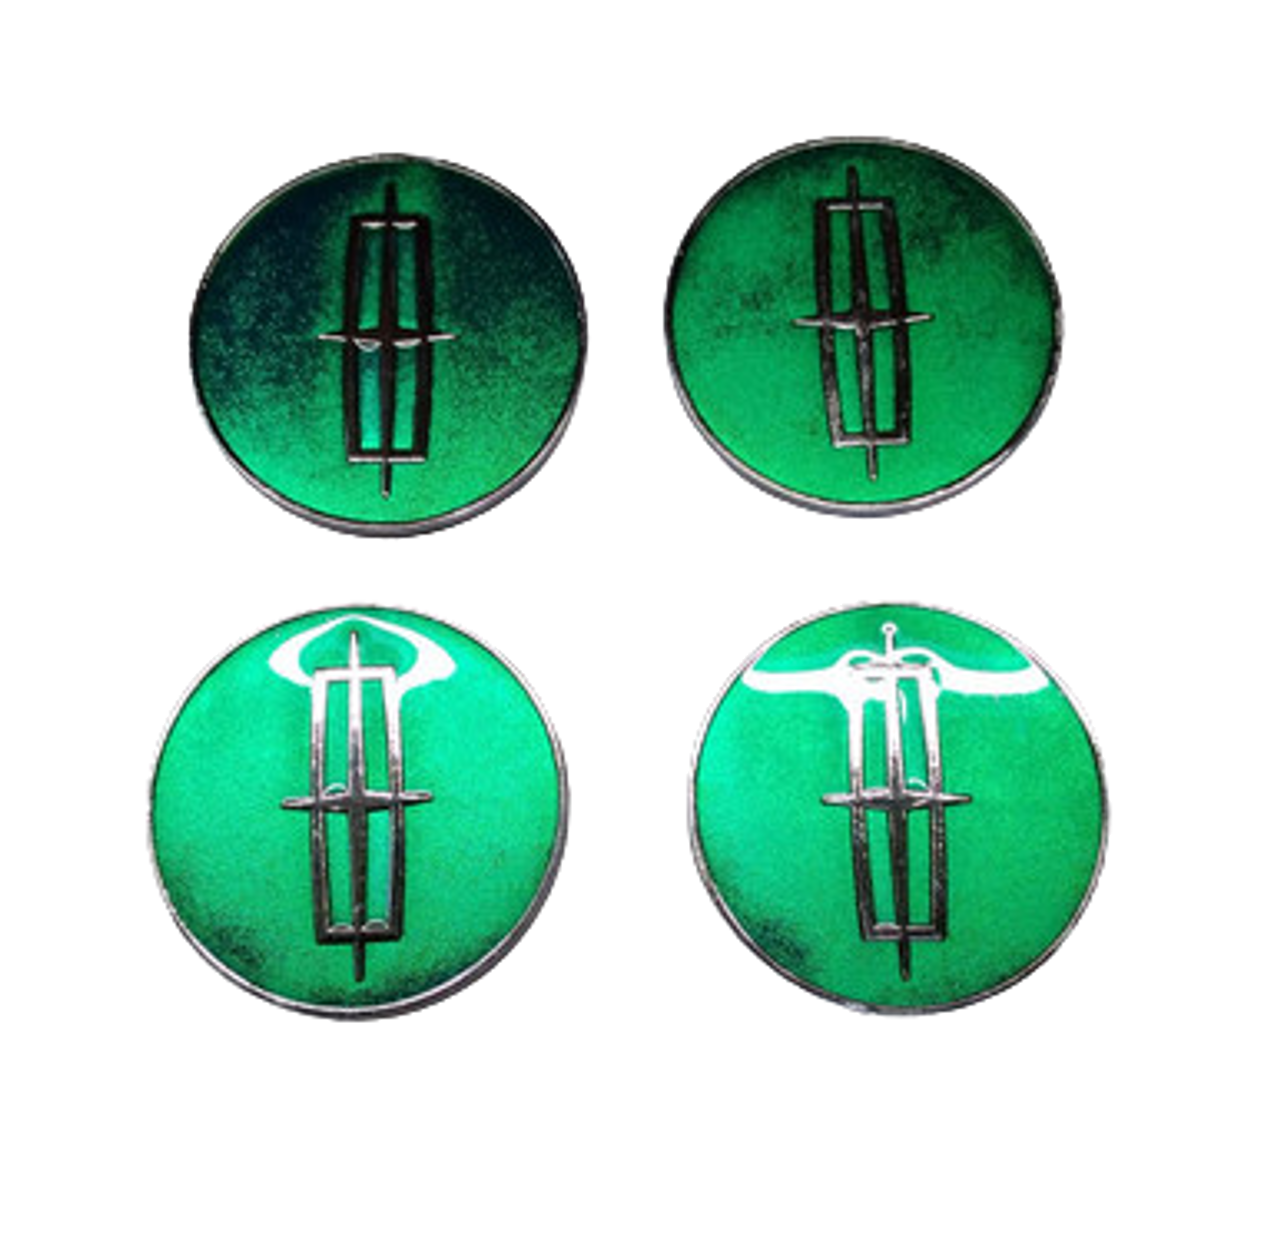 Set of 4 knock-off Lincoln center metal chips (Green & Chrome)